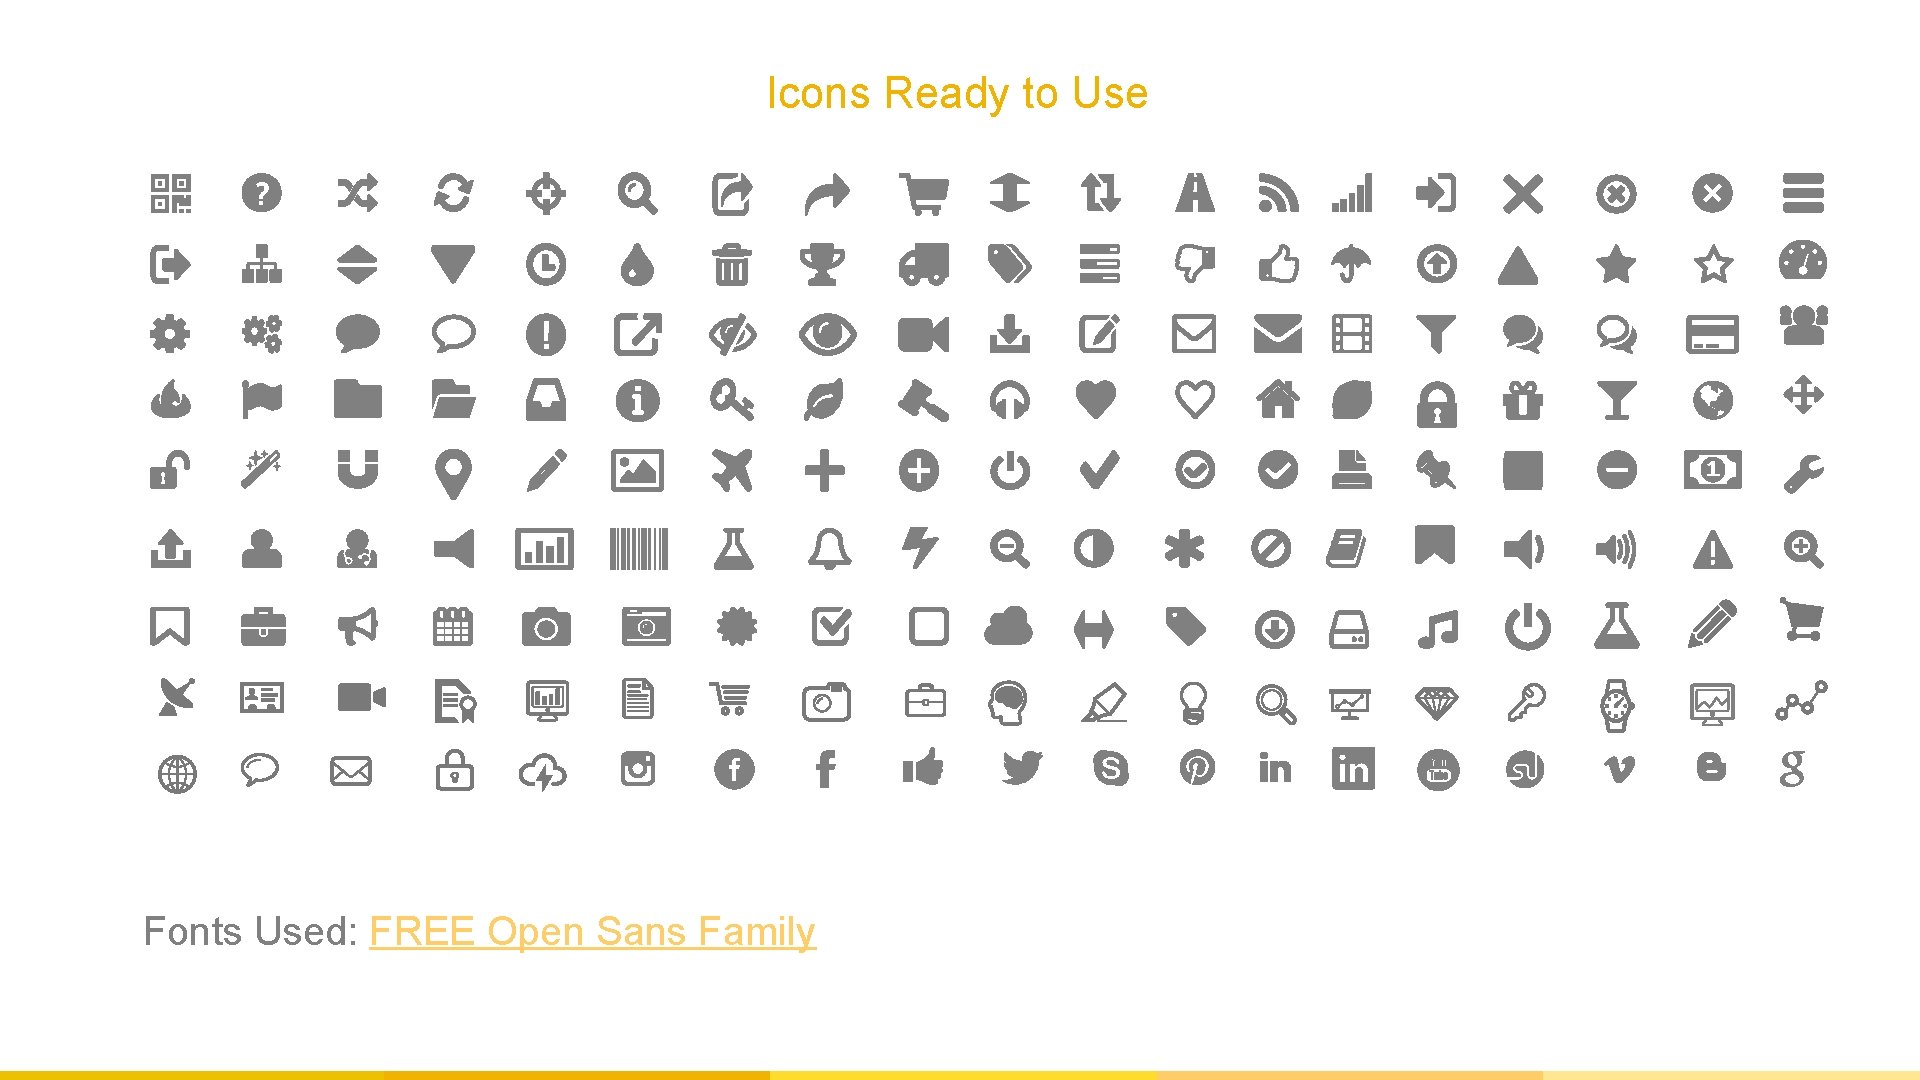 Icons Ready to Use Fonts Used: FREE Open Sans Family 